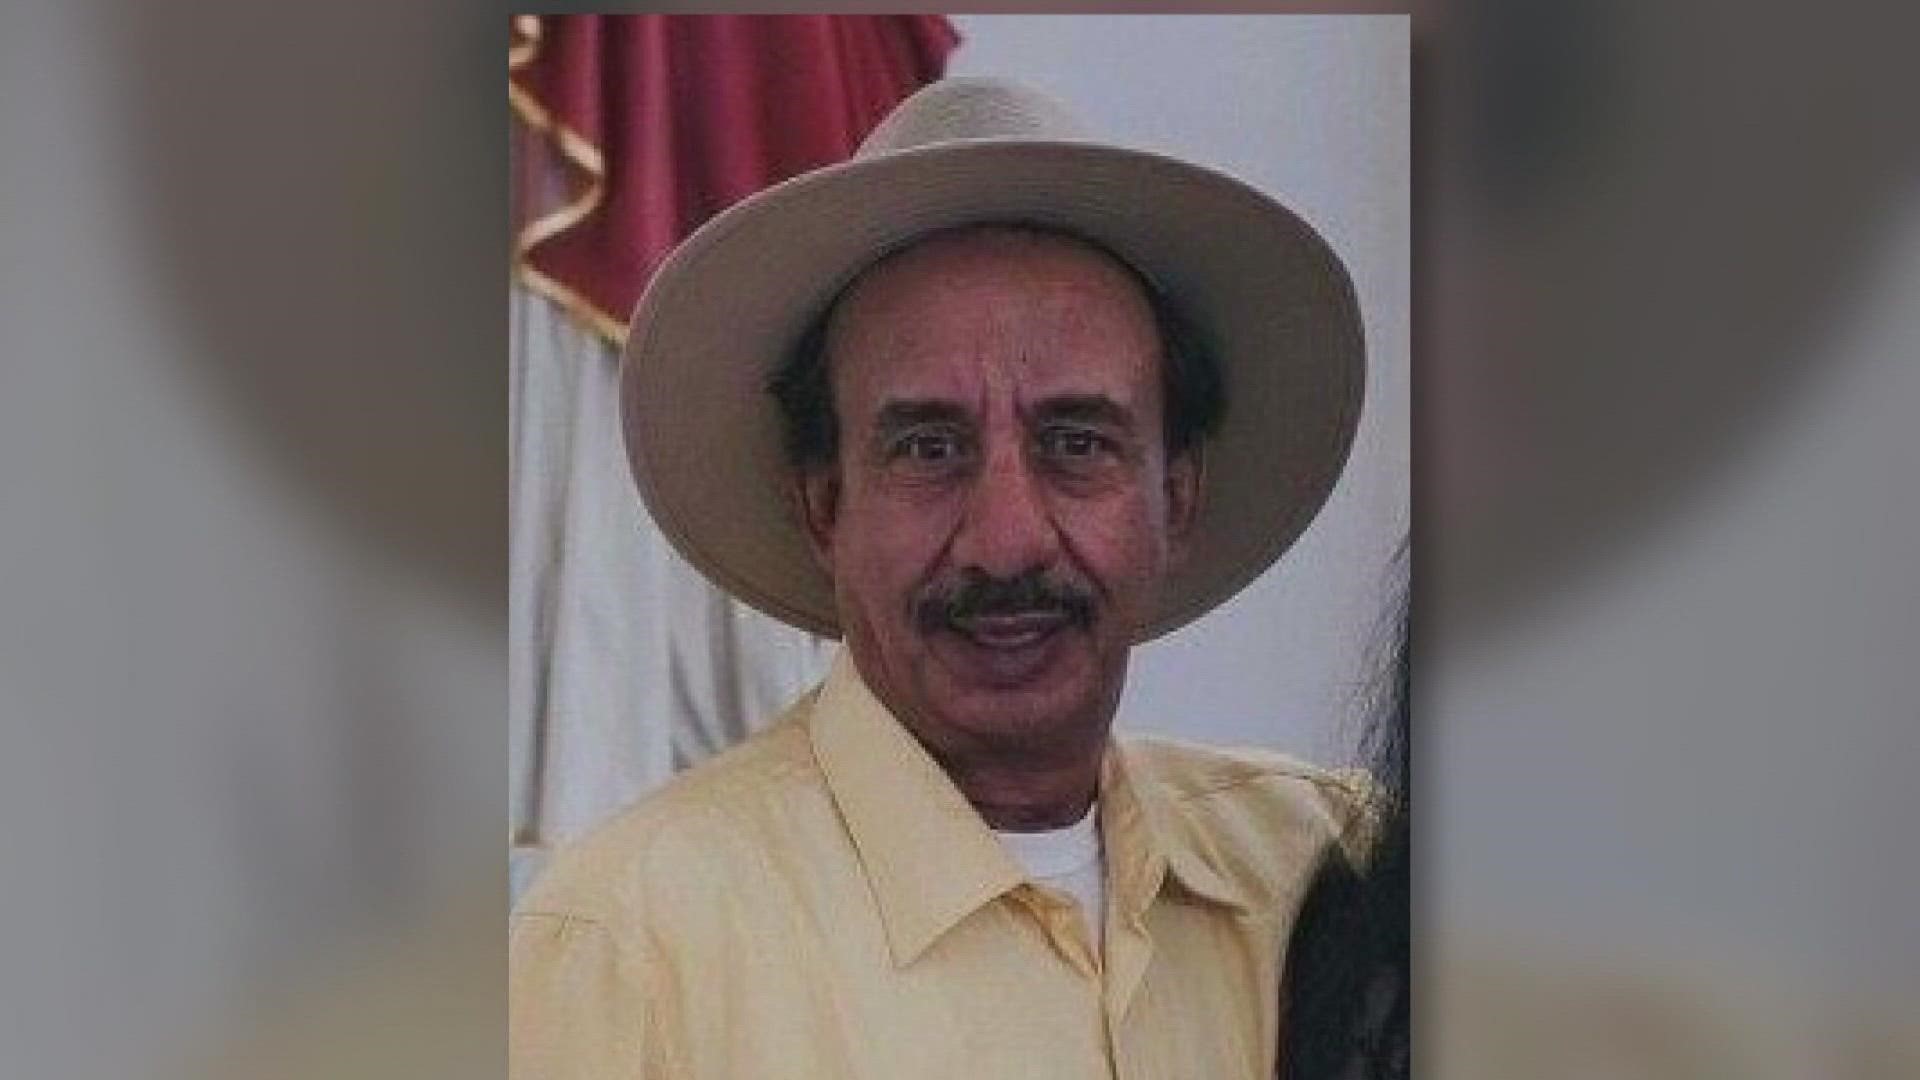 Gustavo Gomez, 71, had been driving semi-trucks for nearly 21 years, per his wife. He's lived in Dallas since the early 80s and was a father of five.